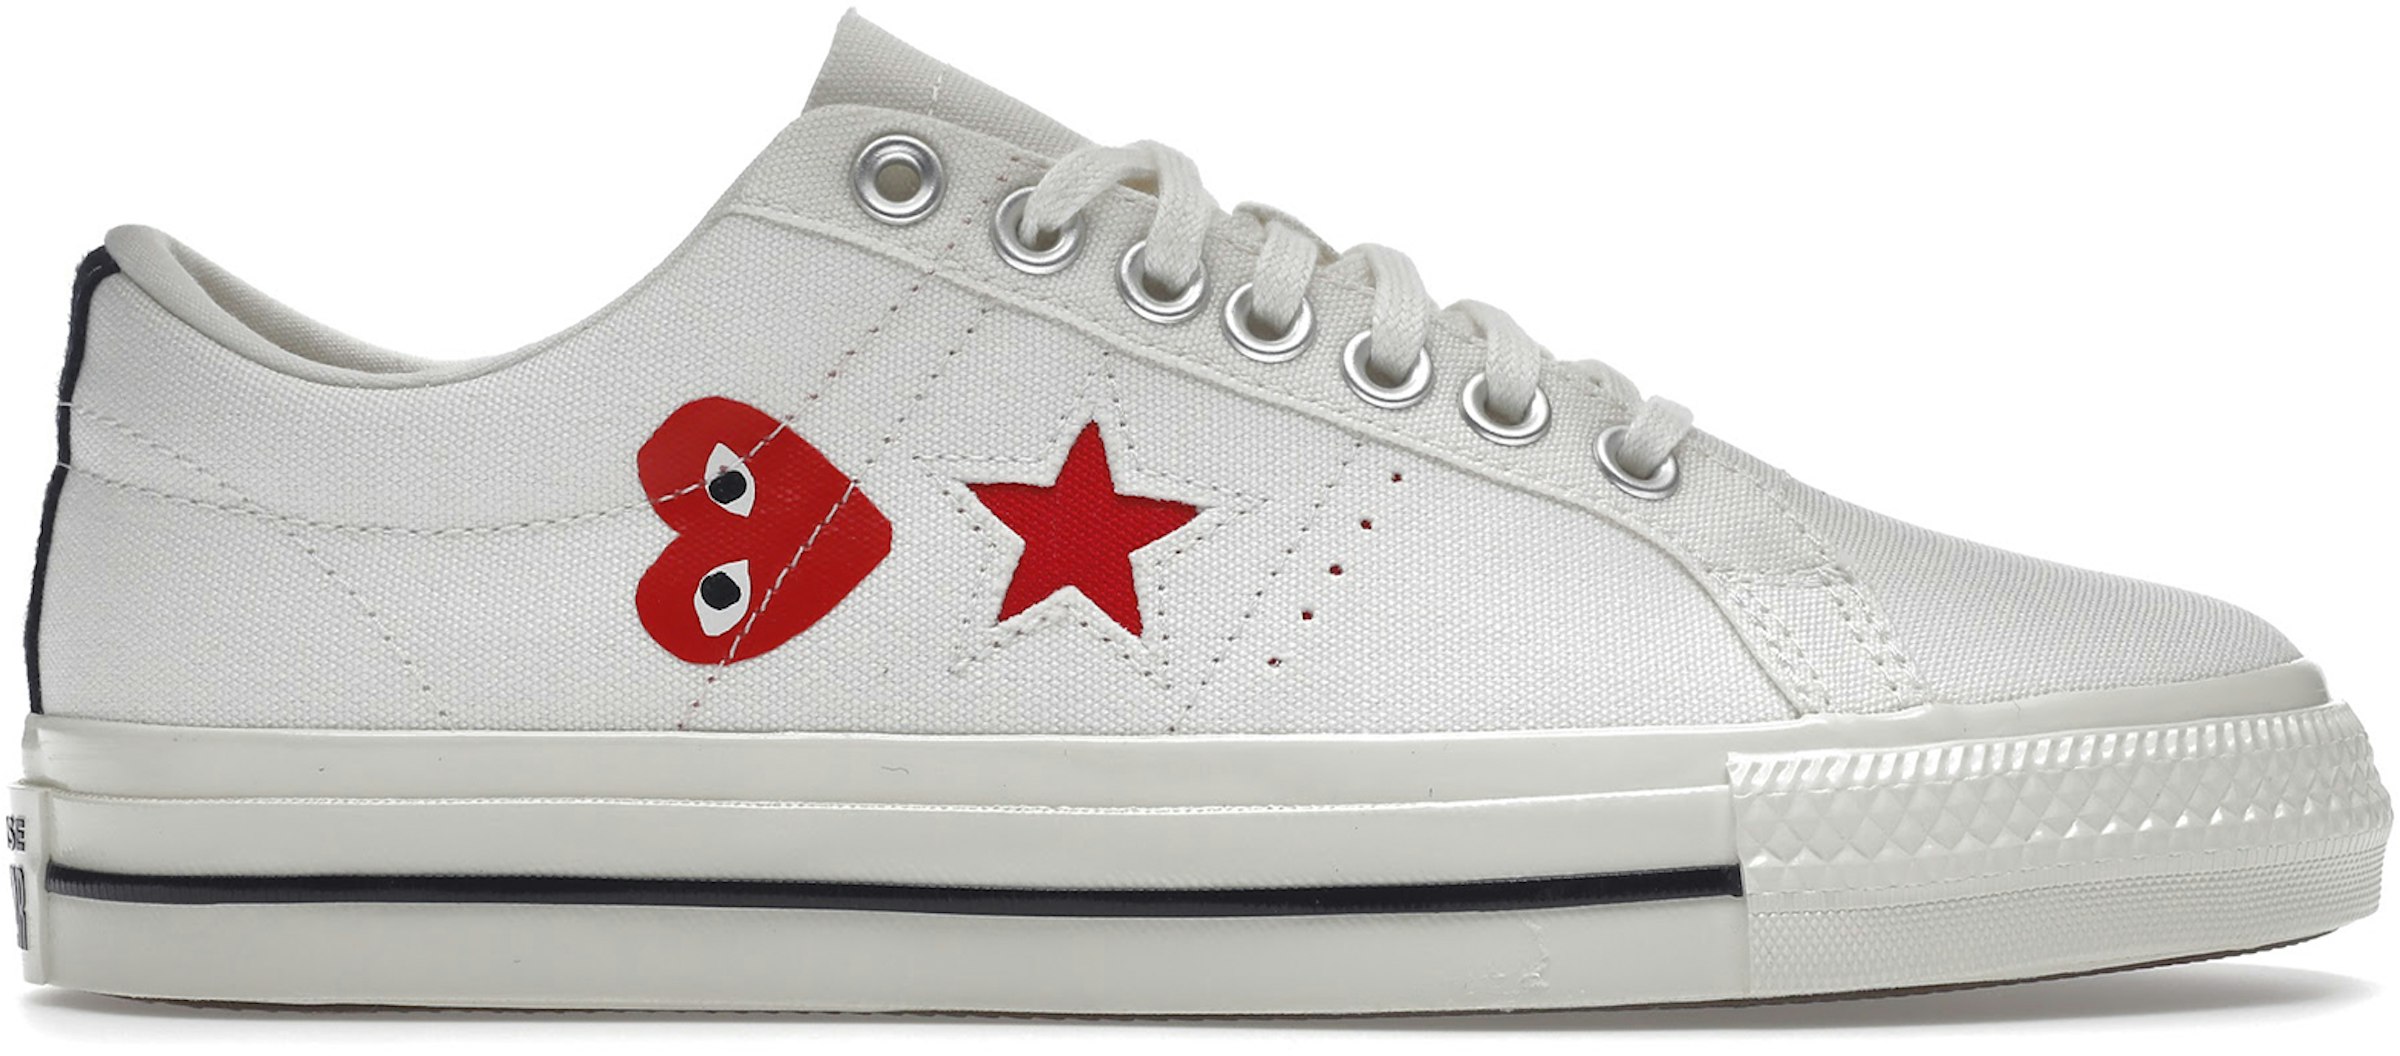 Converse Star Ox Comme Garcons White - A01792C - US